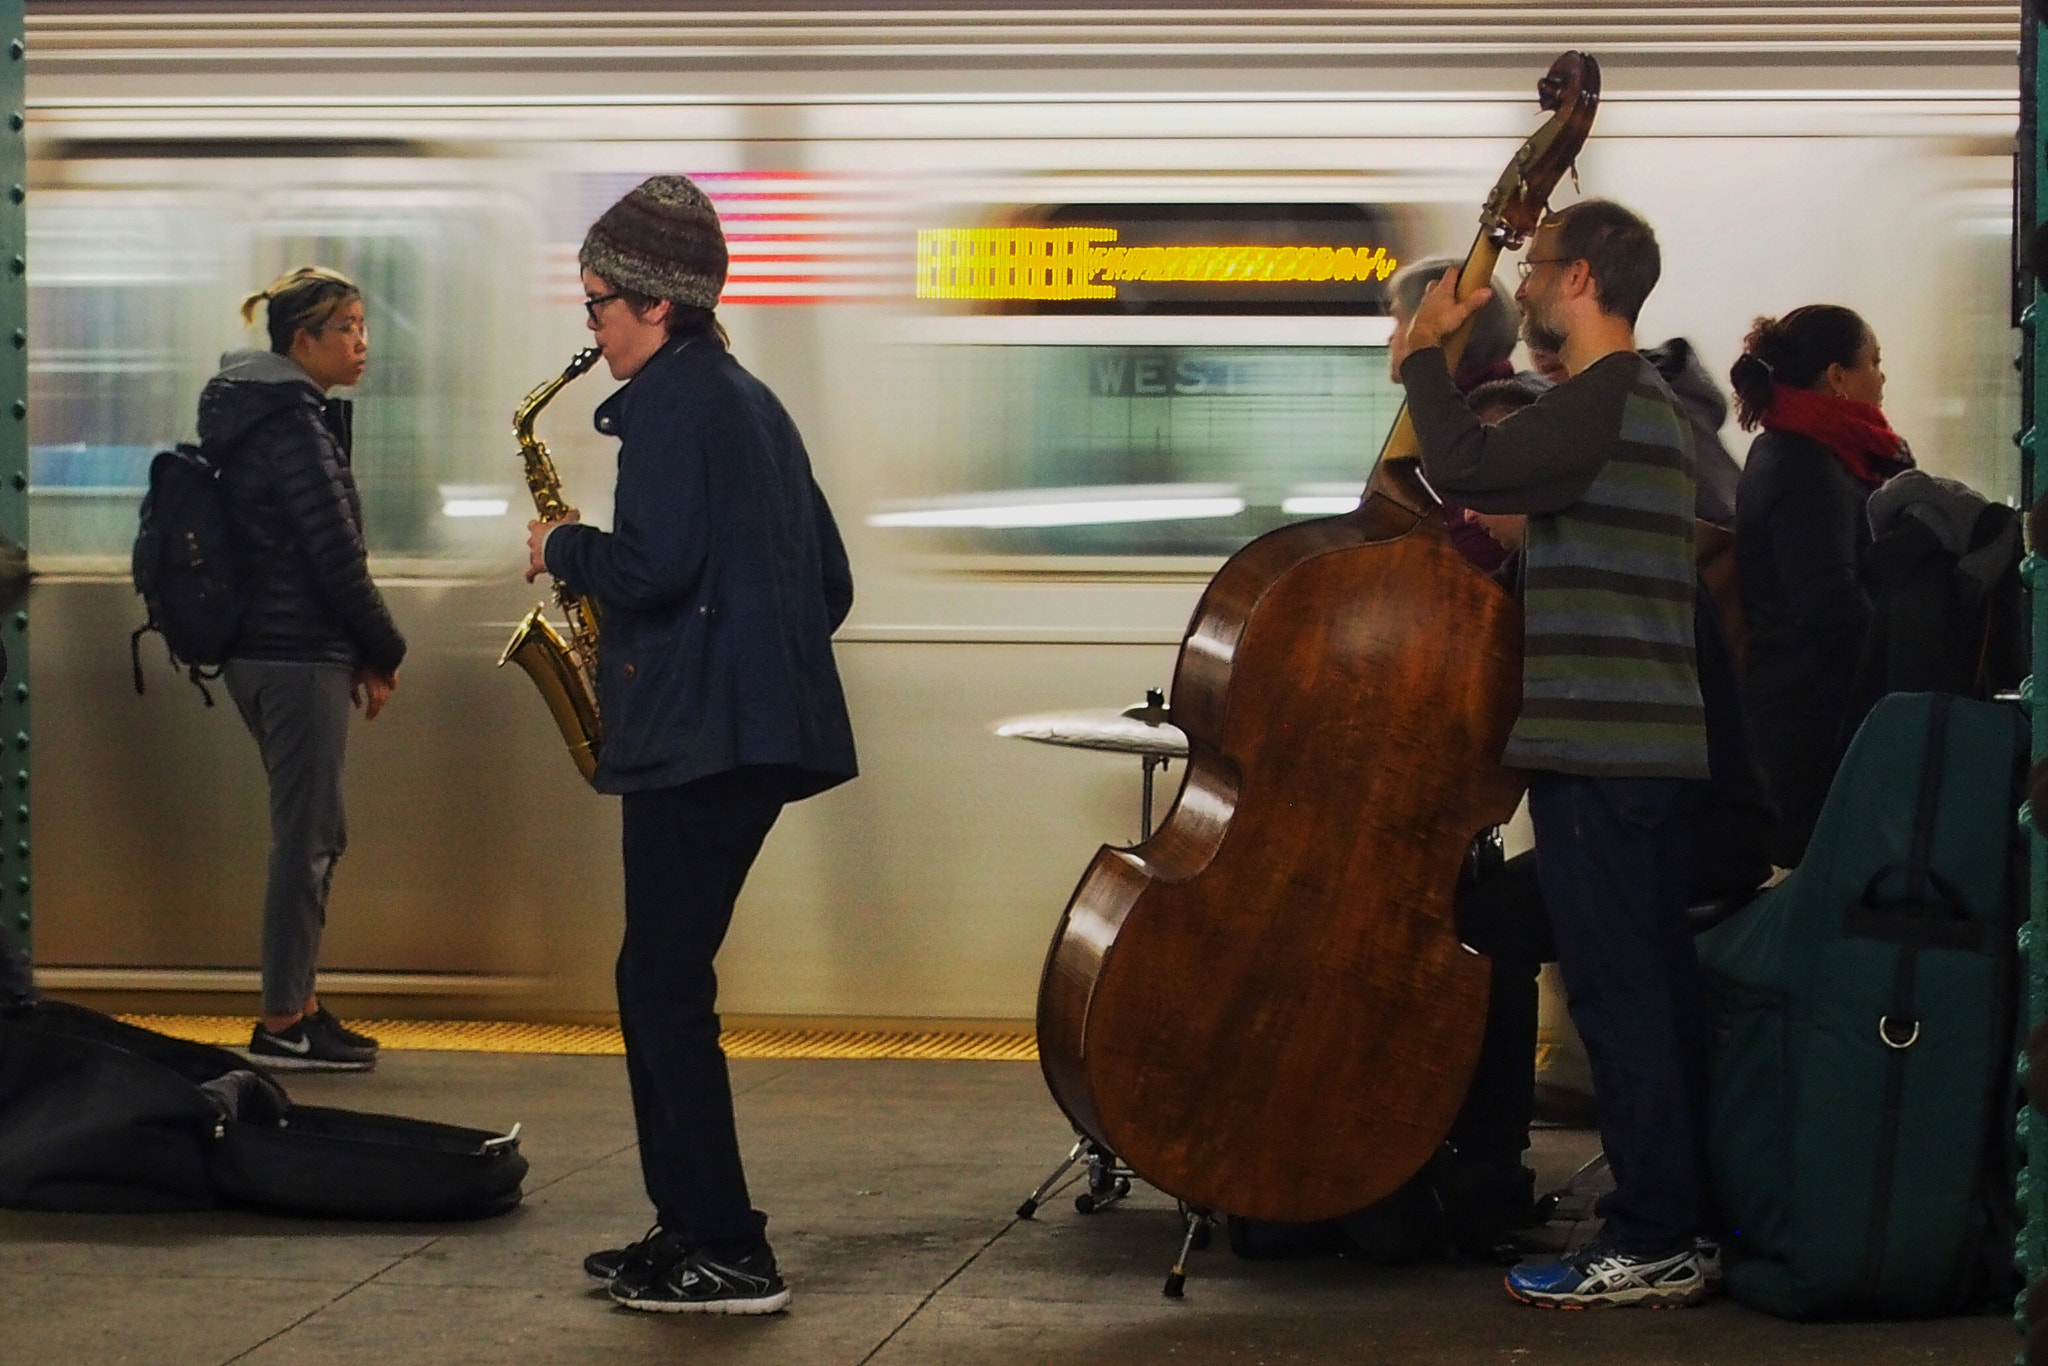 Olympus PEN E-PL5 sample photo. Street musicians in nyc subway photography